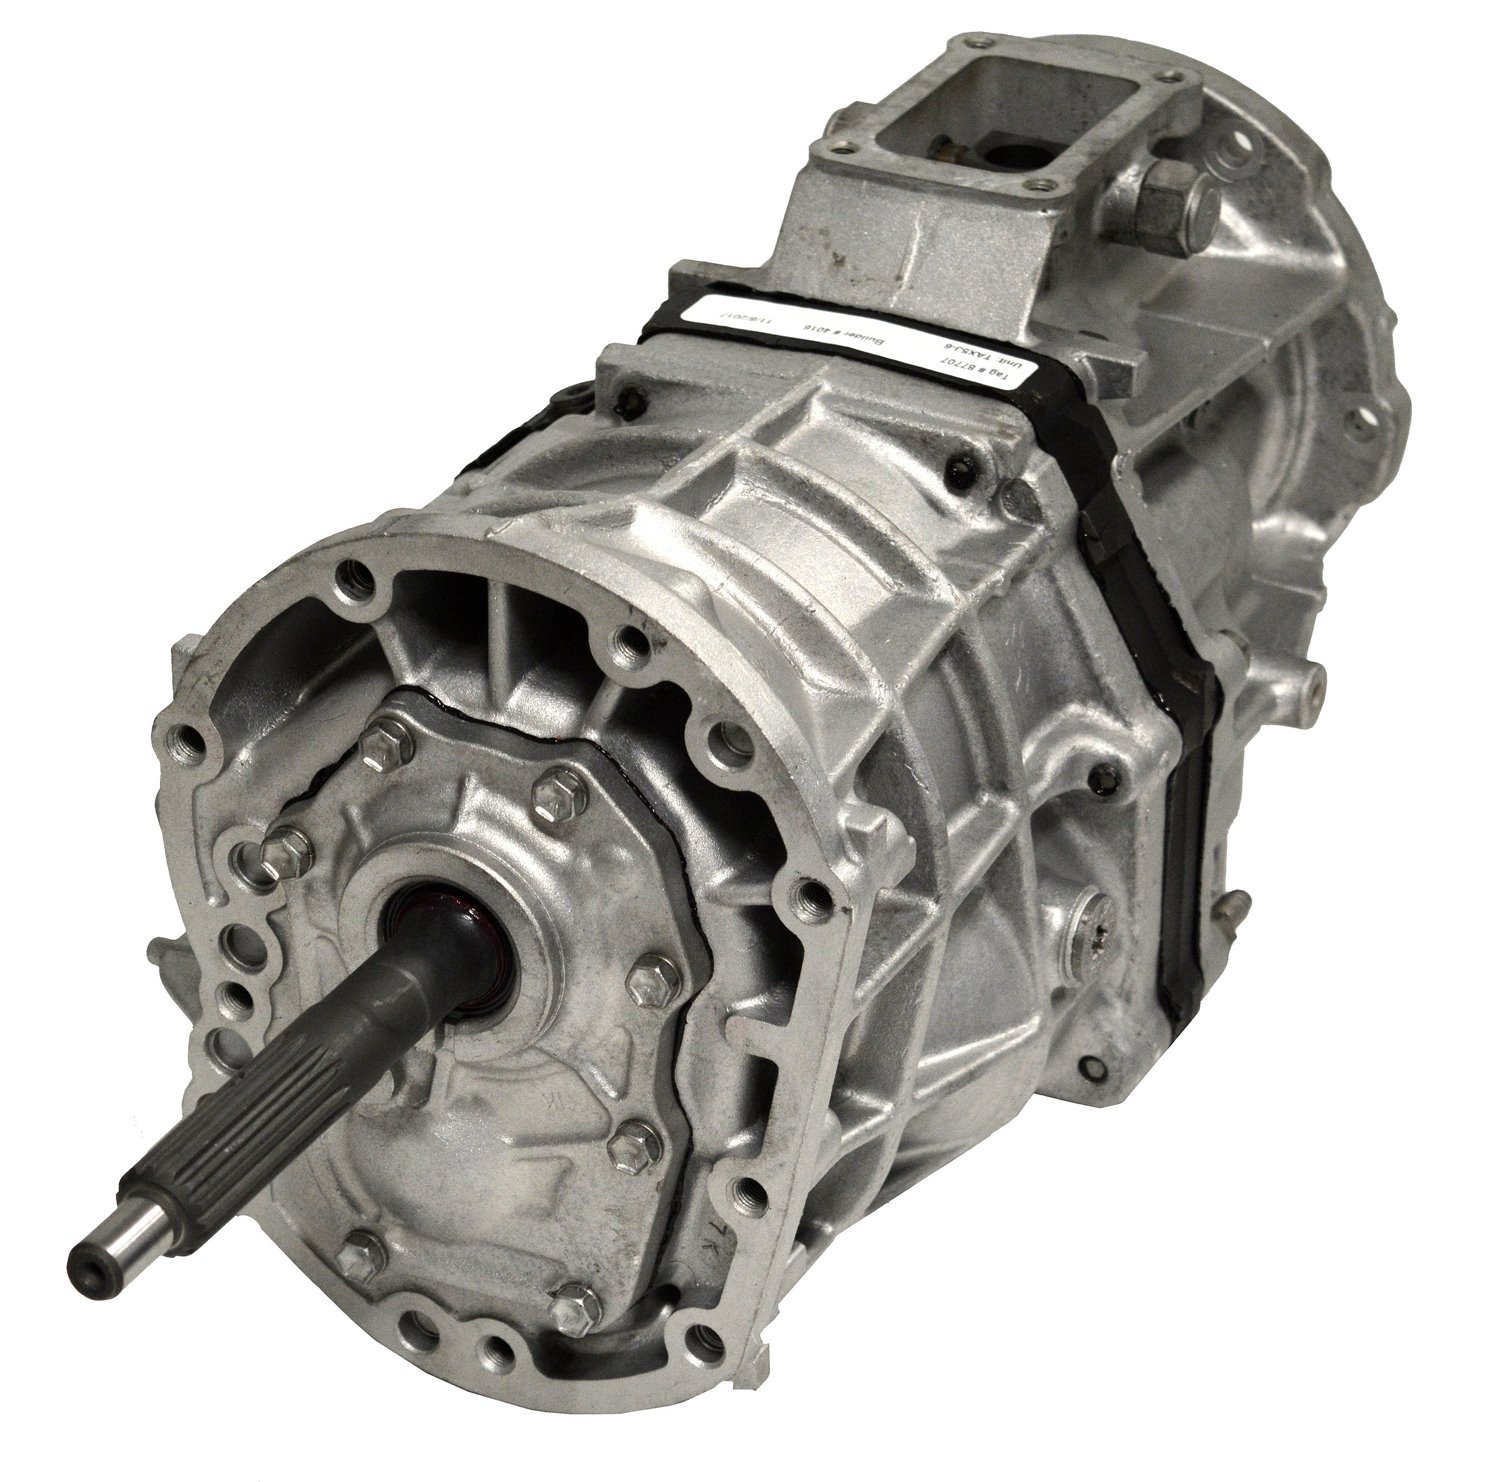 Remanufactured AX5 Manual Transmission for Jeep 94-96 Cherokee, 4x4, 5 Speed